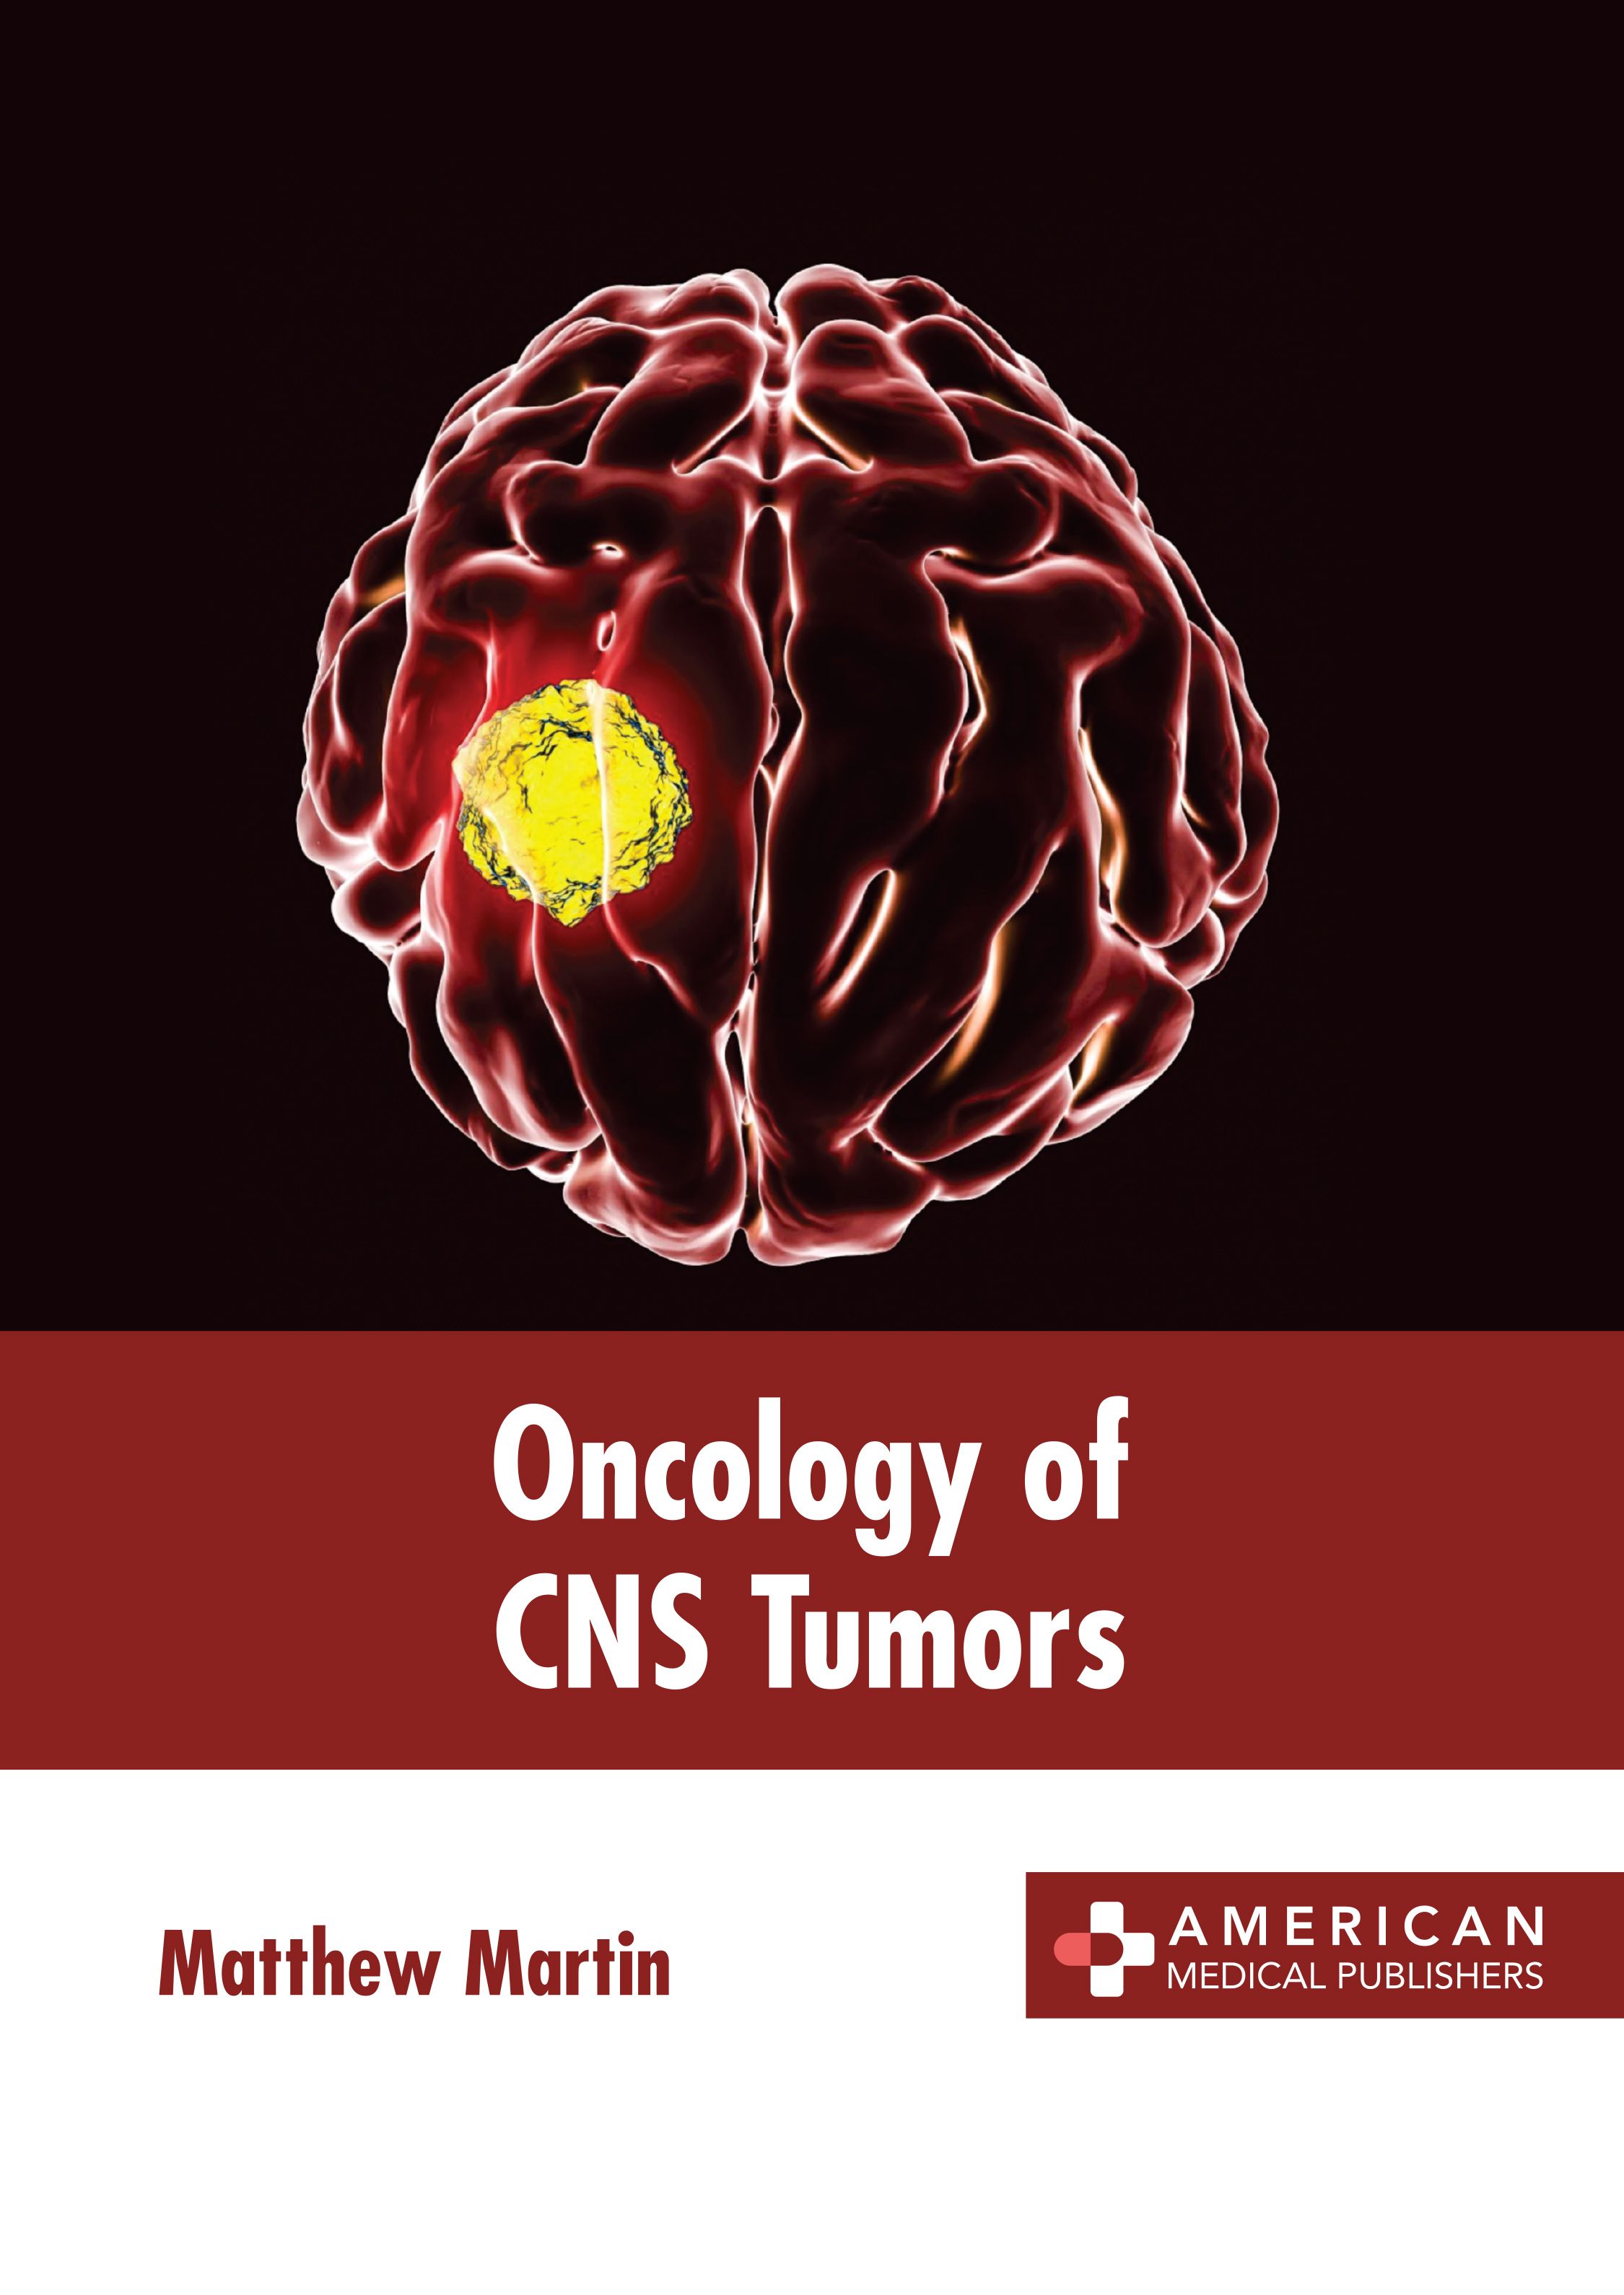 ONCOLOGY OF CNS TUMORS